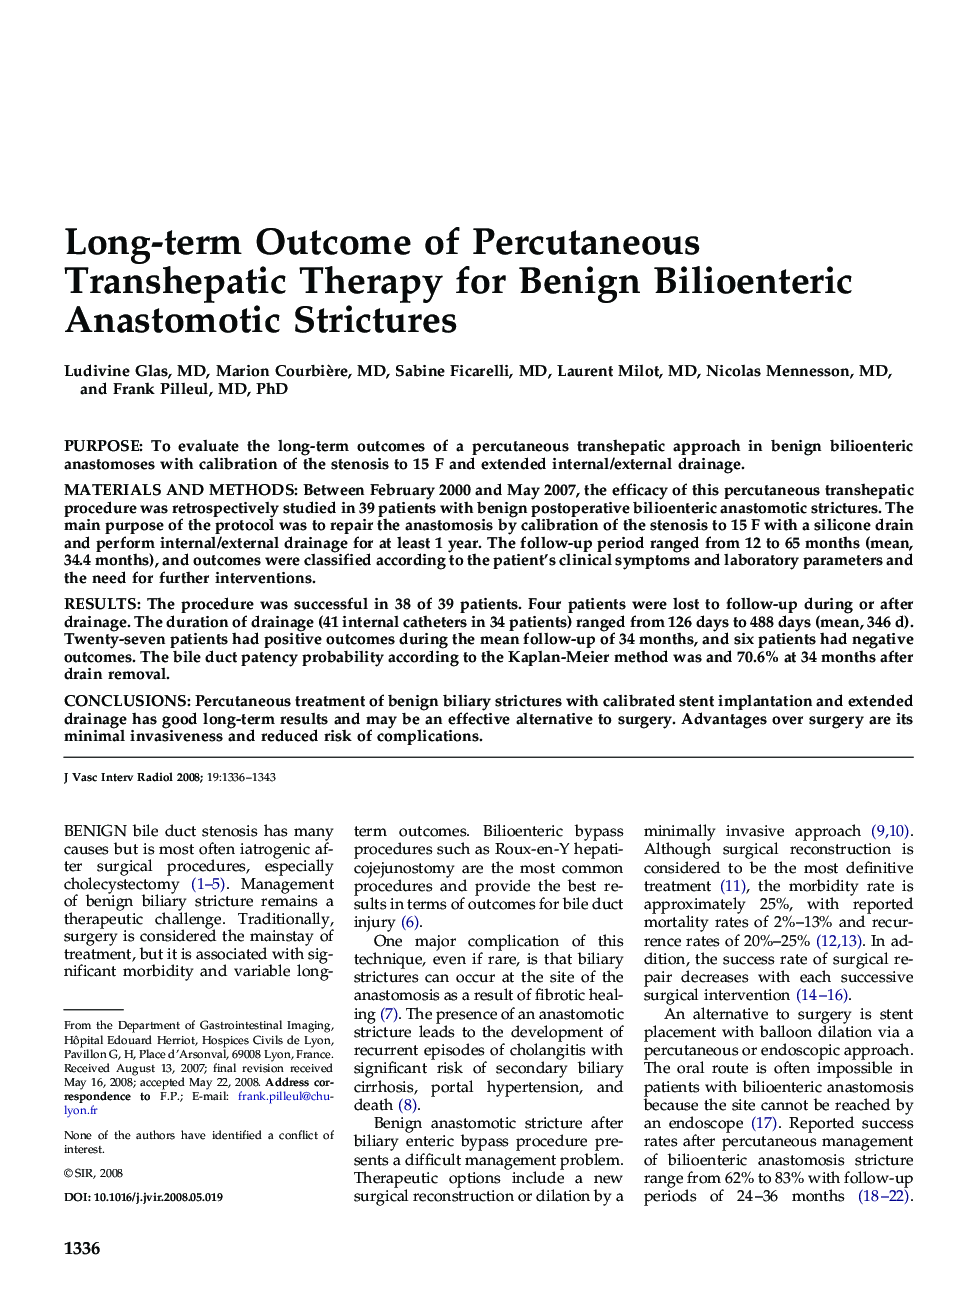 Long-term Outcome of Percutaneous Transhepatic Therapy for Benign Bilioenteric Anastomotic Strictures